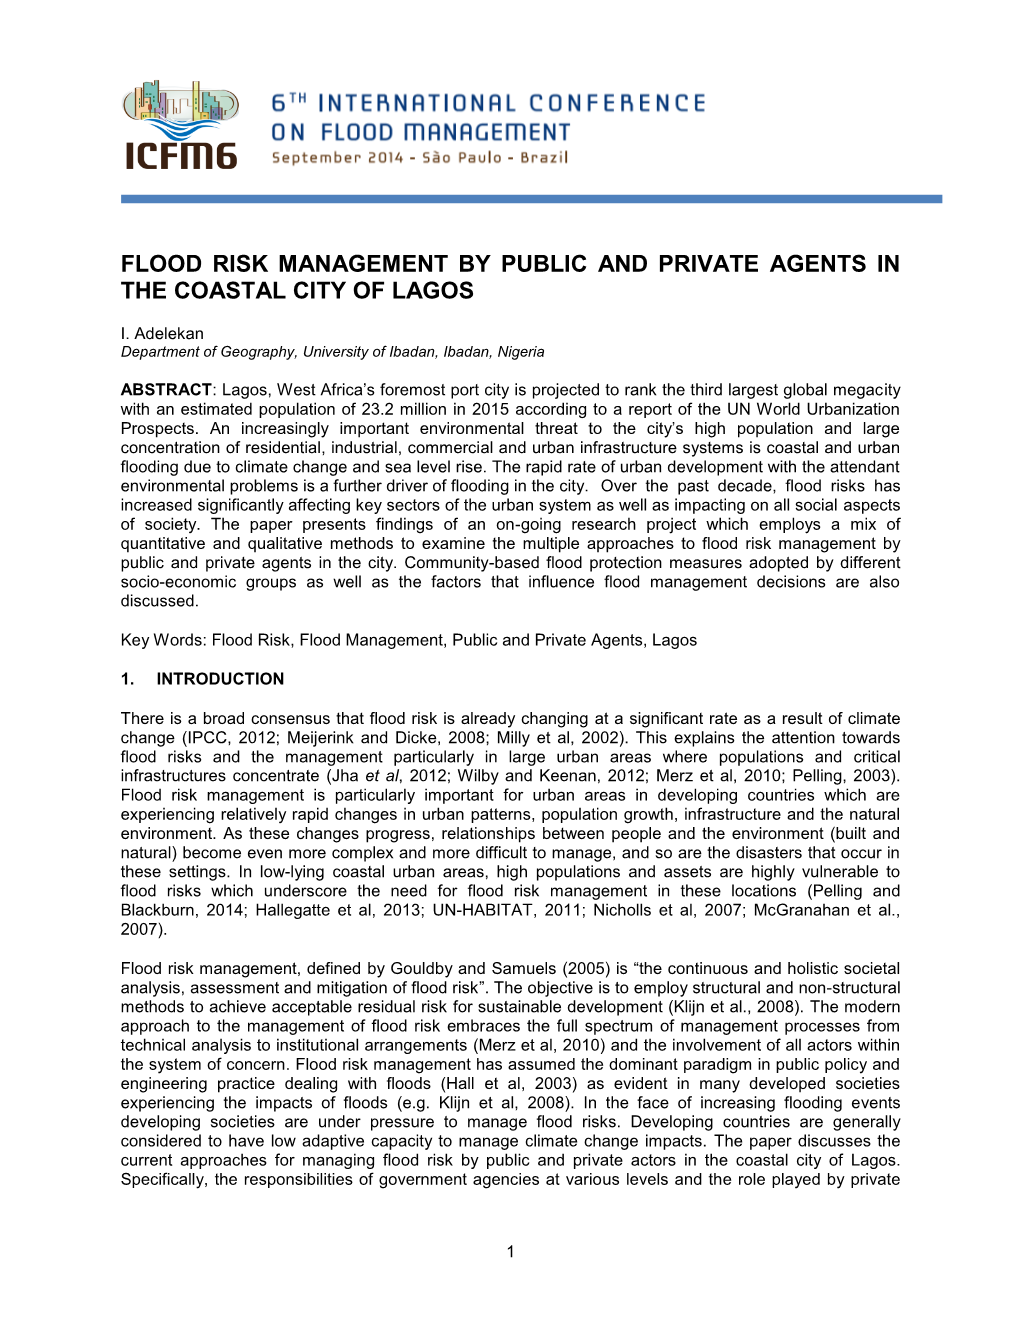 Flood Risk Management by Public and Private Agents in the Coastal City of Lagos